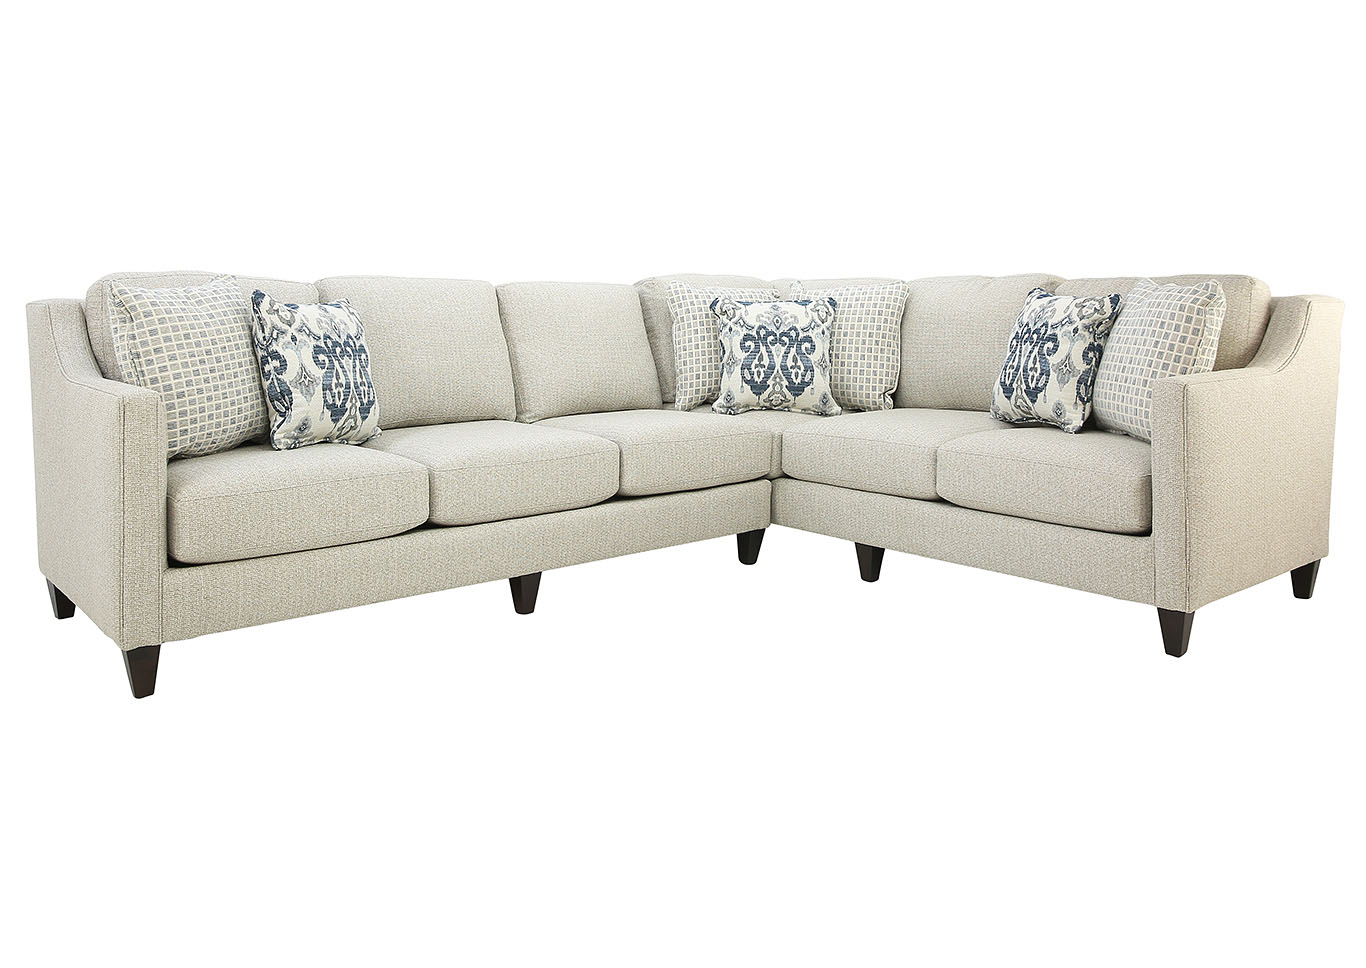 TWINE AND TWIG CHALK 2 PIECE SECTIONAL